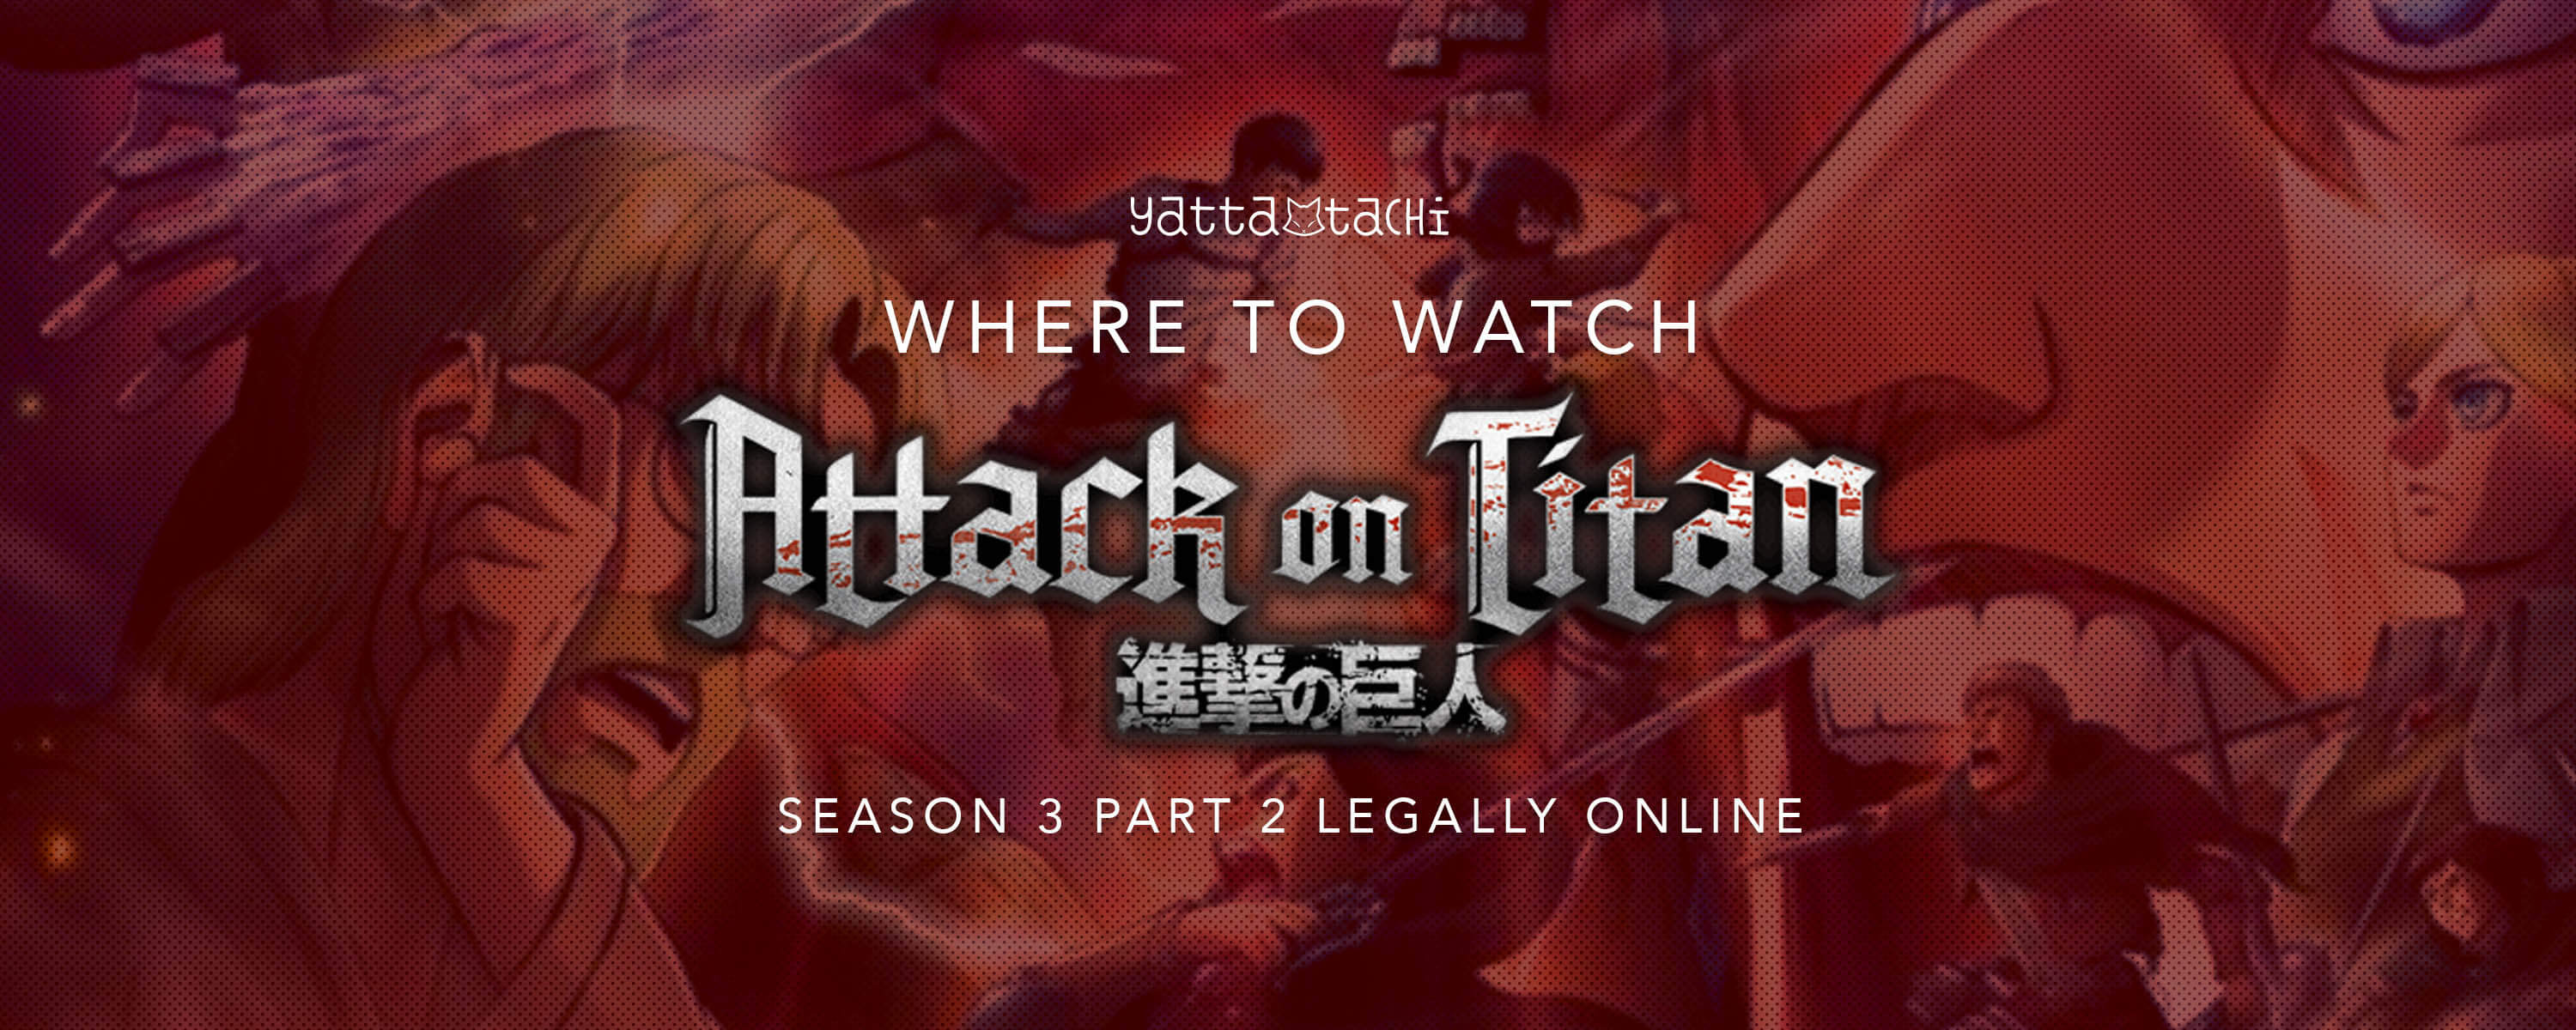 Where To Watch Attack On Titan Season 3 Part 2 Yatta Tachi Discover watches you've never seen before. where to watch attack on titan season 3